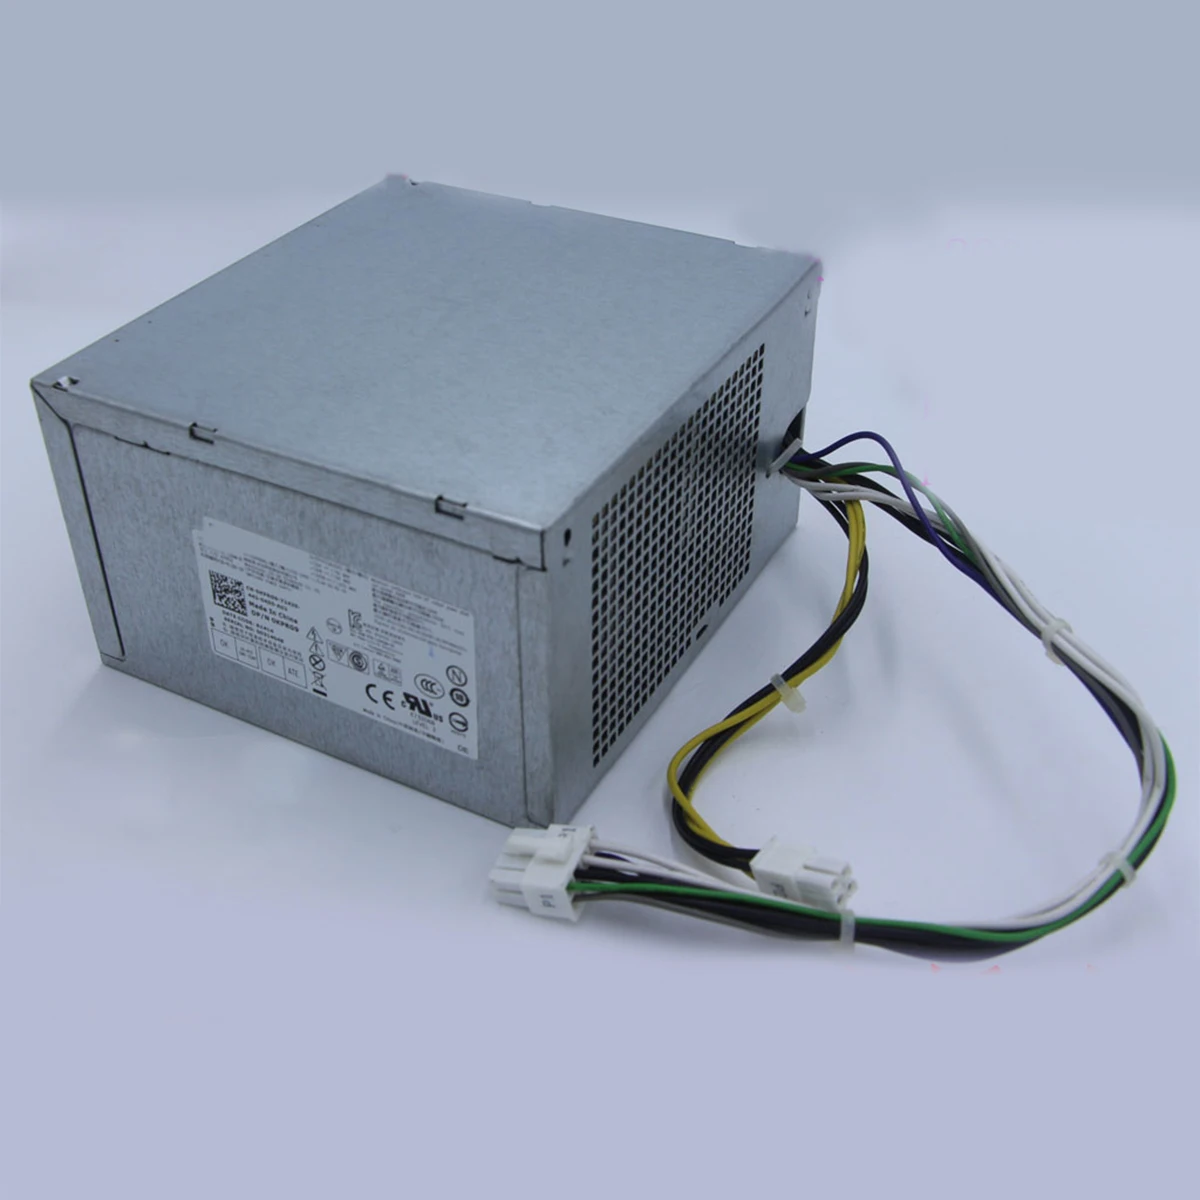 For DELL  3020 7020 9020 T1700 MT Power Supply 365W L290AM-00 H AC290AM-00 Psu